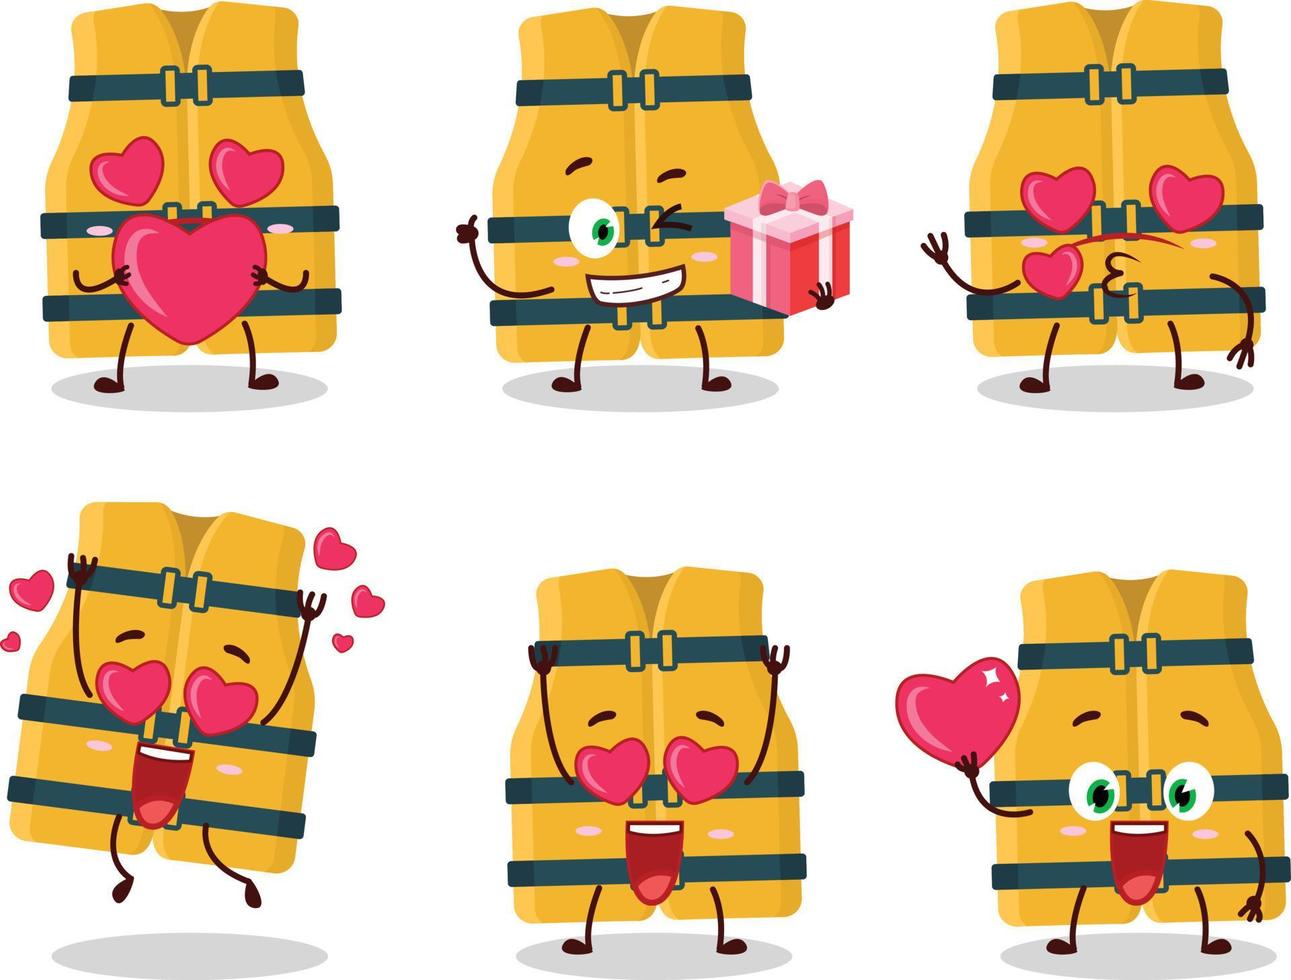 Life vest cartoon character with love cute emoticon vector